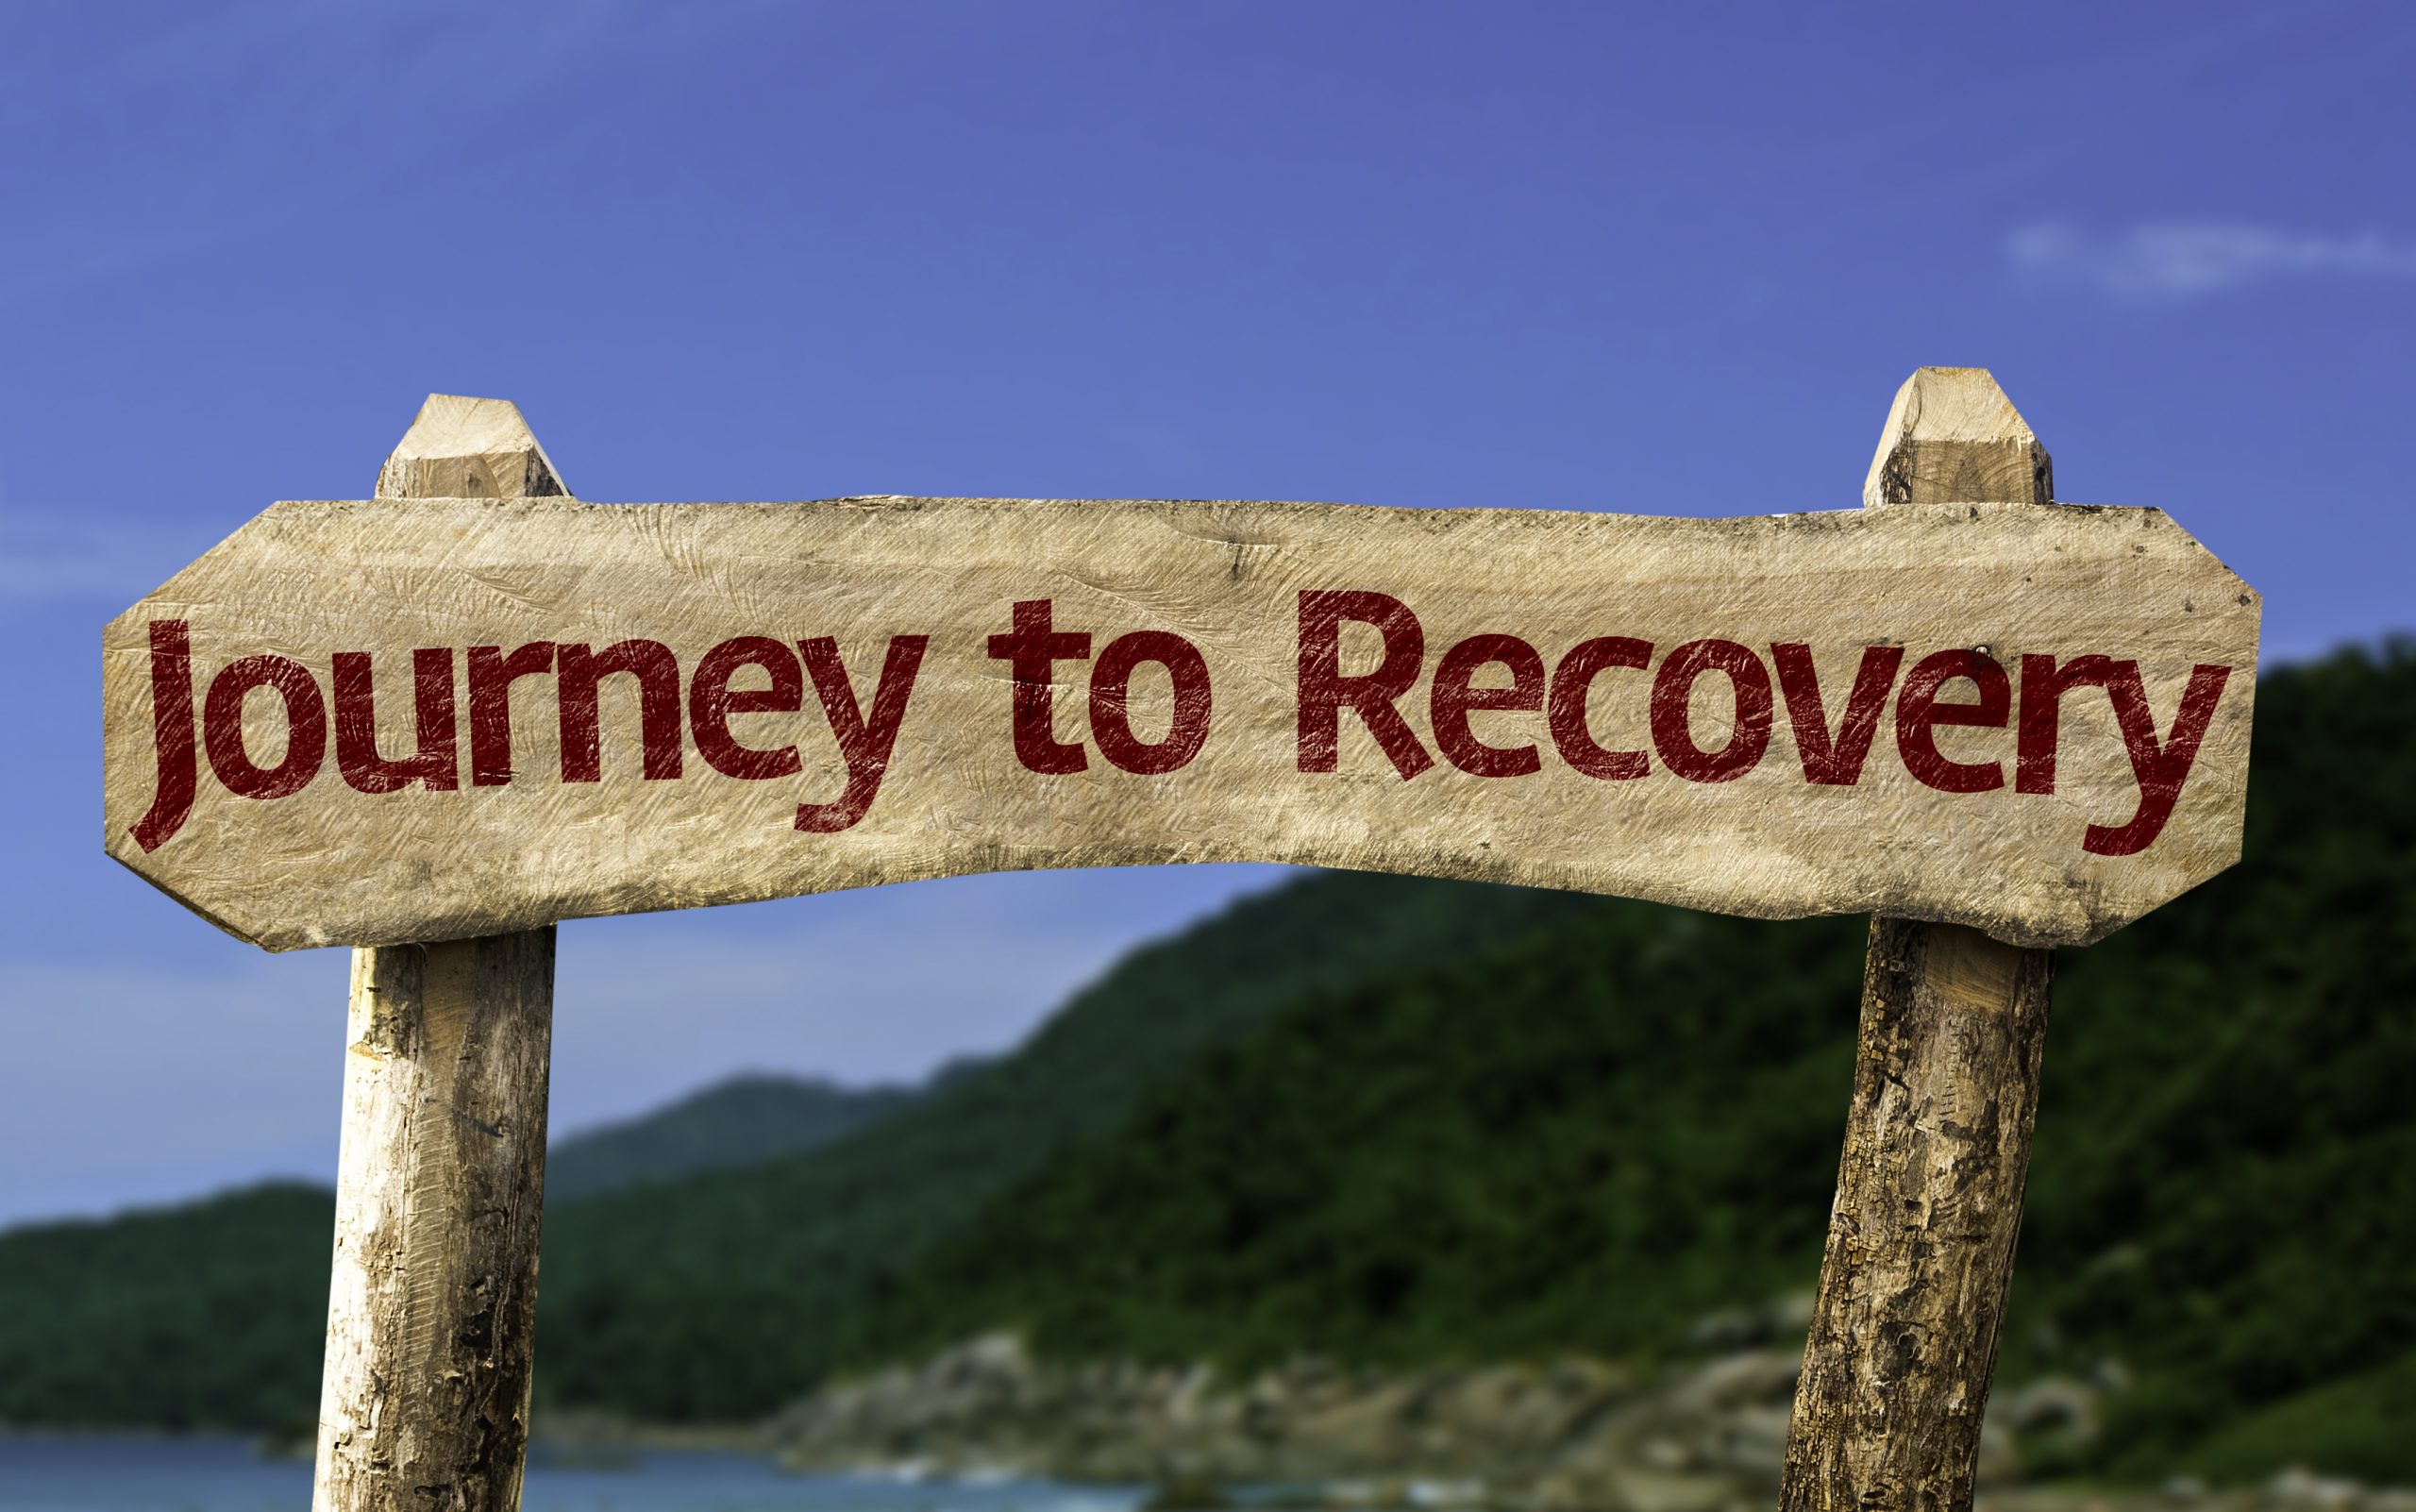 A sign reads: journey to recovery. The sign is outside with a hill behind it and blue sky.